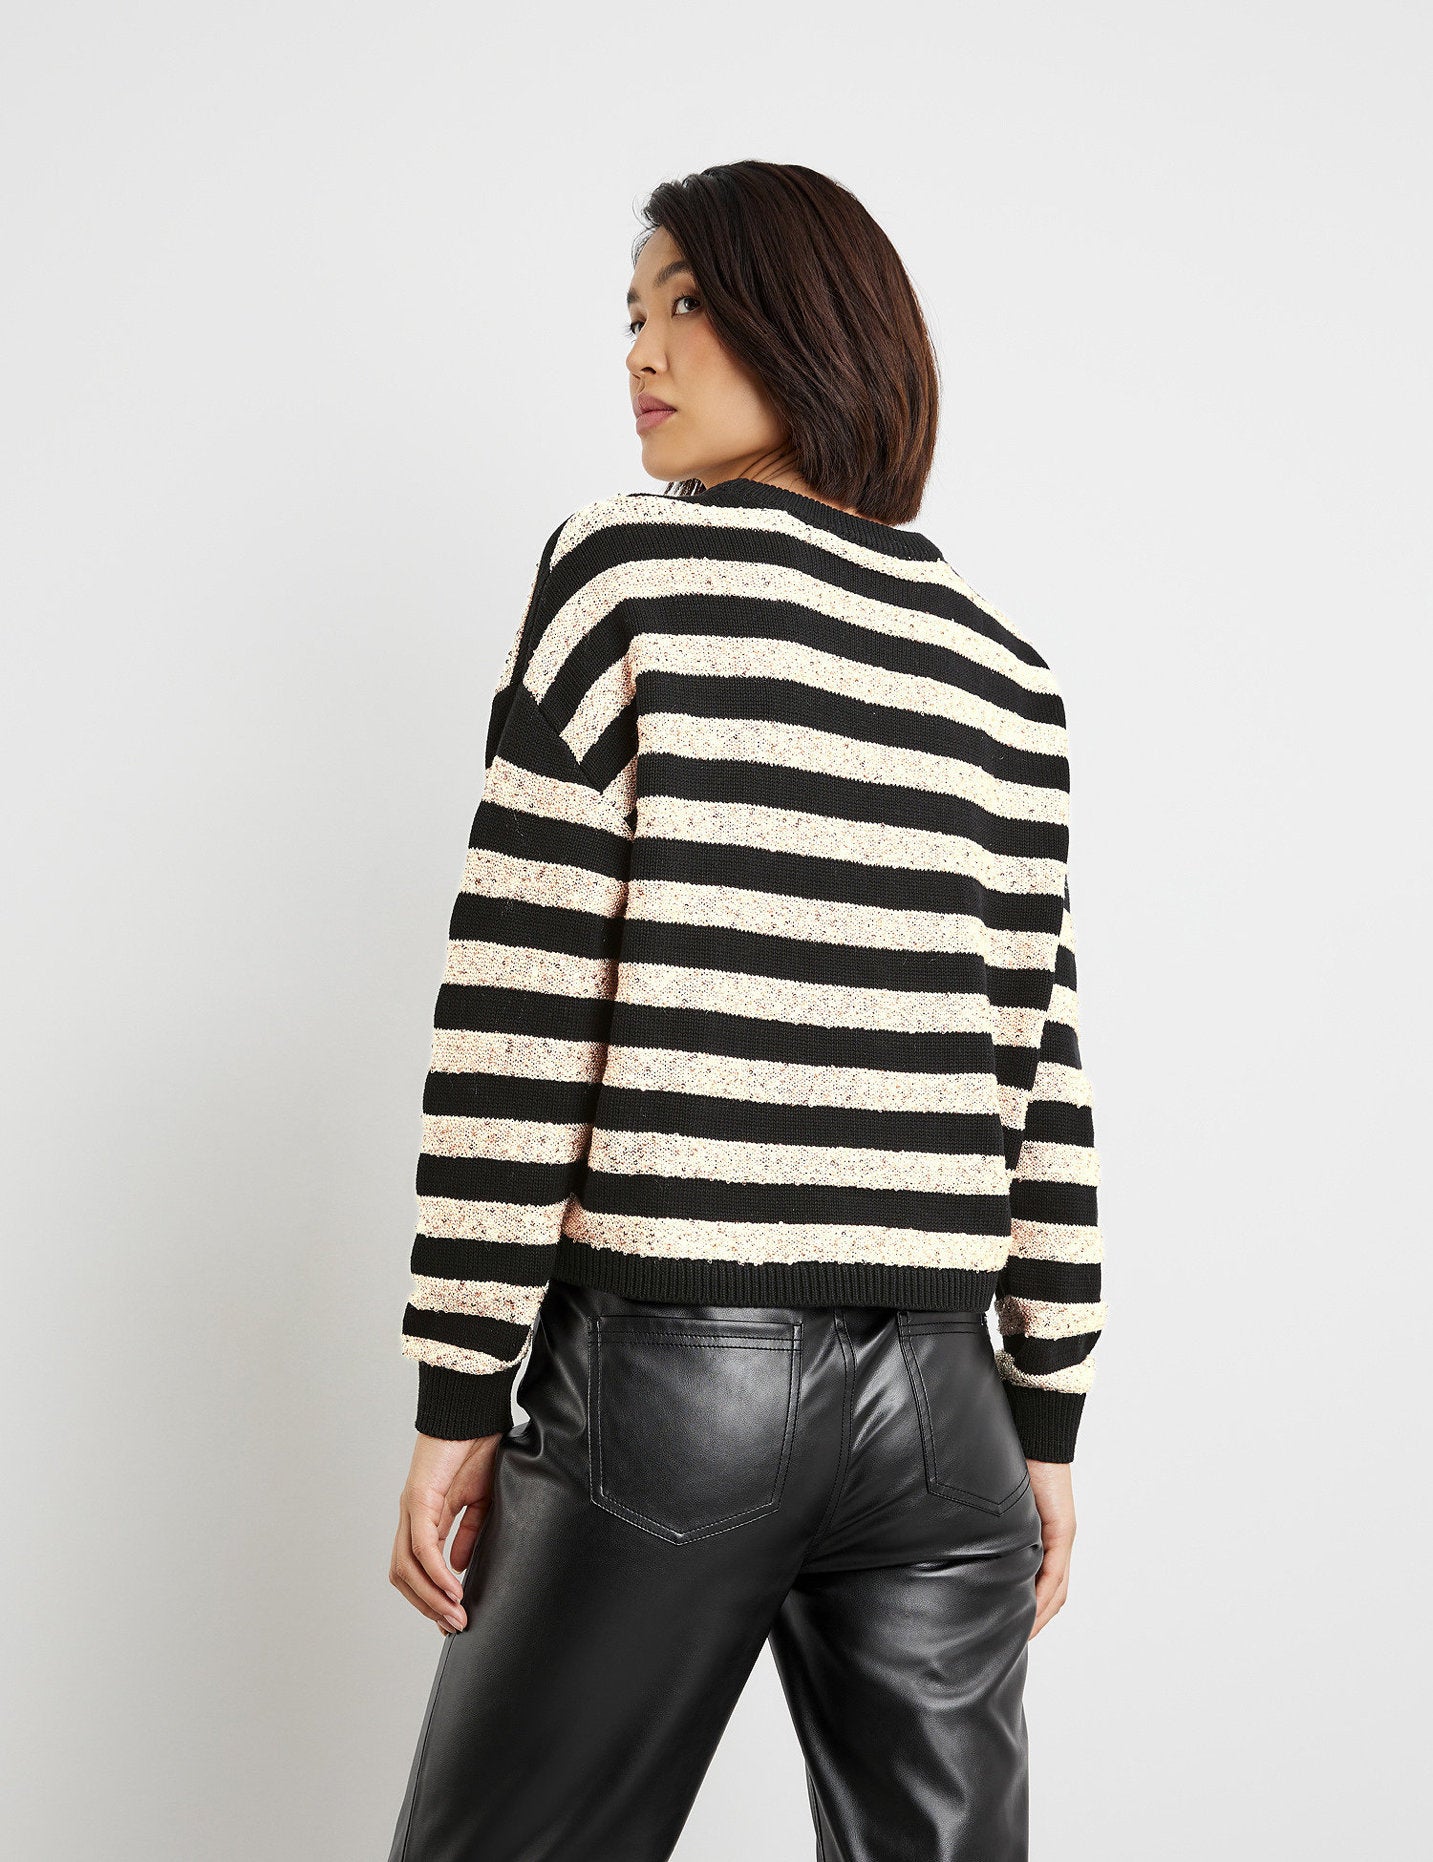 Striped Jumper With Sequin Embellishment_472414-15314_1103_06